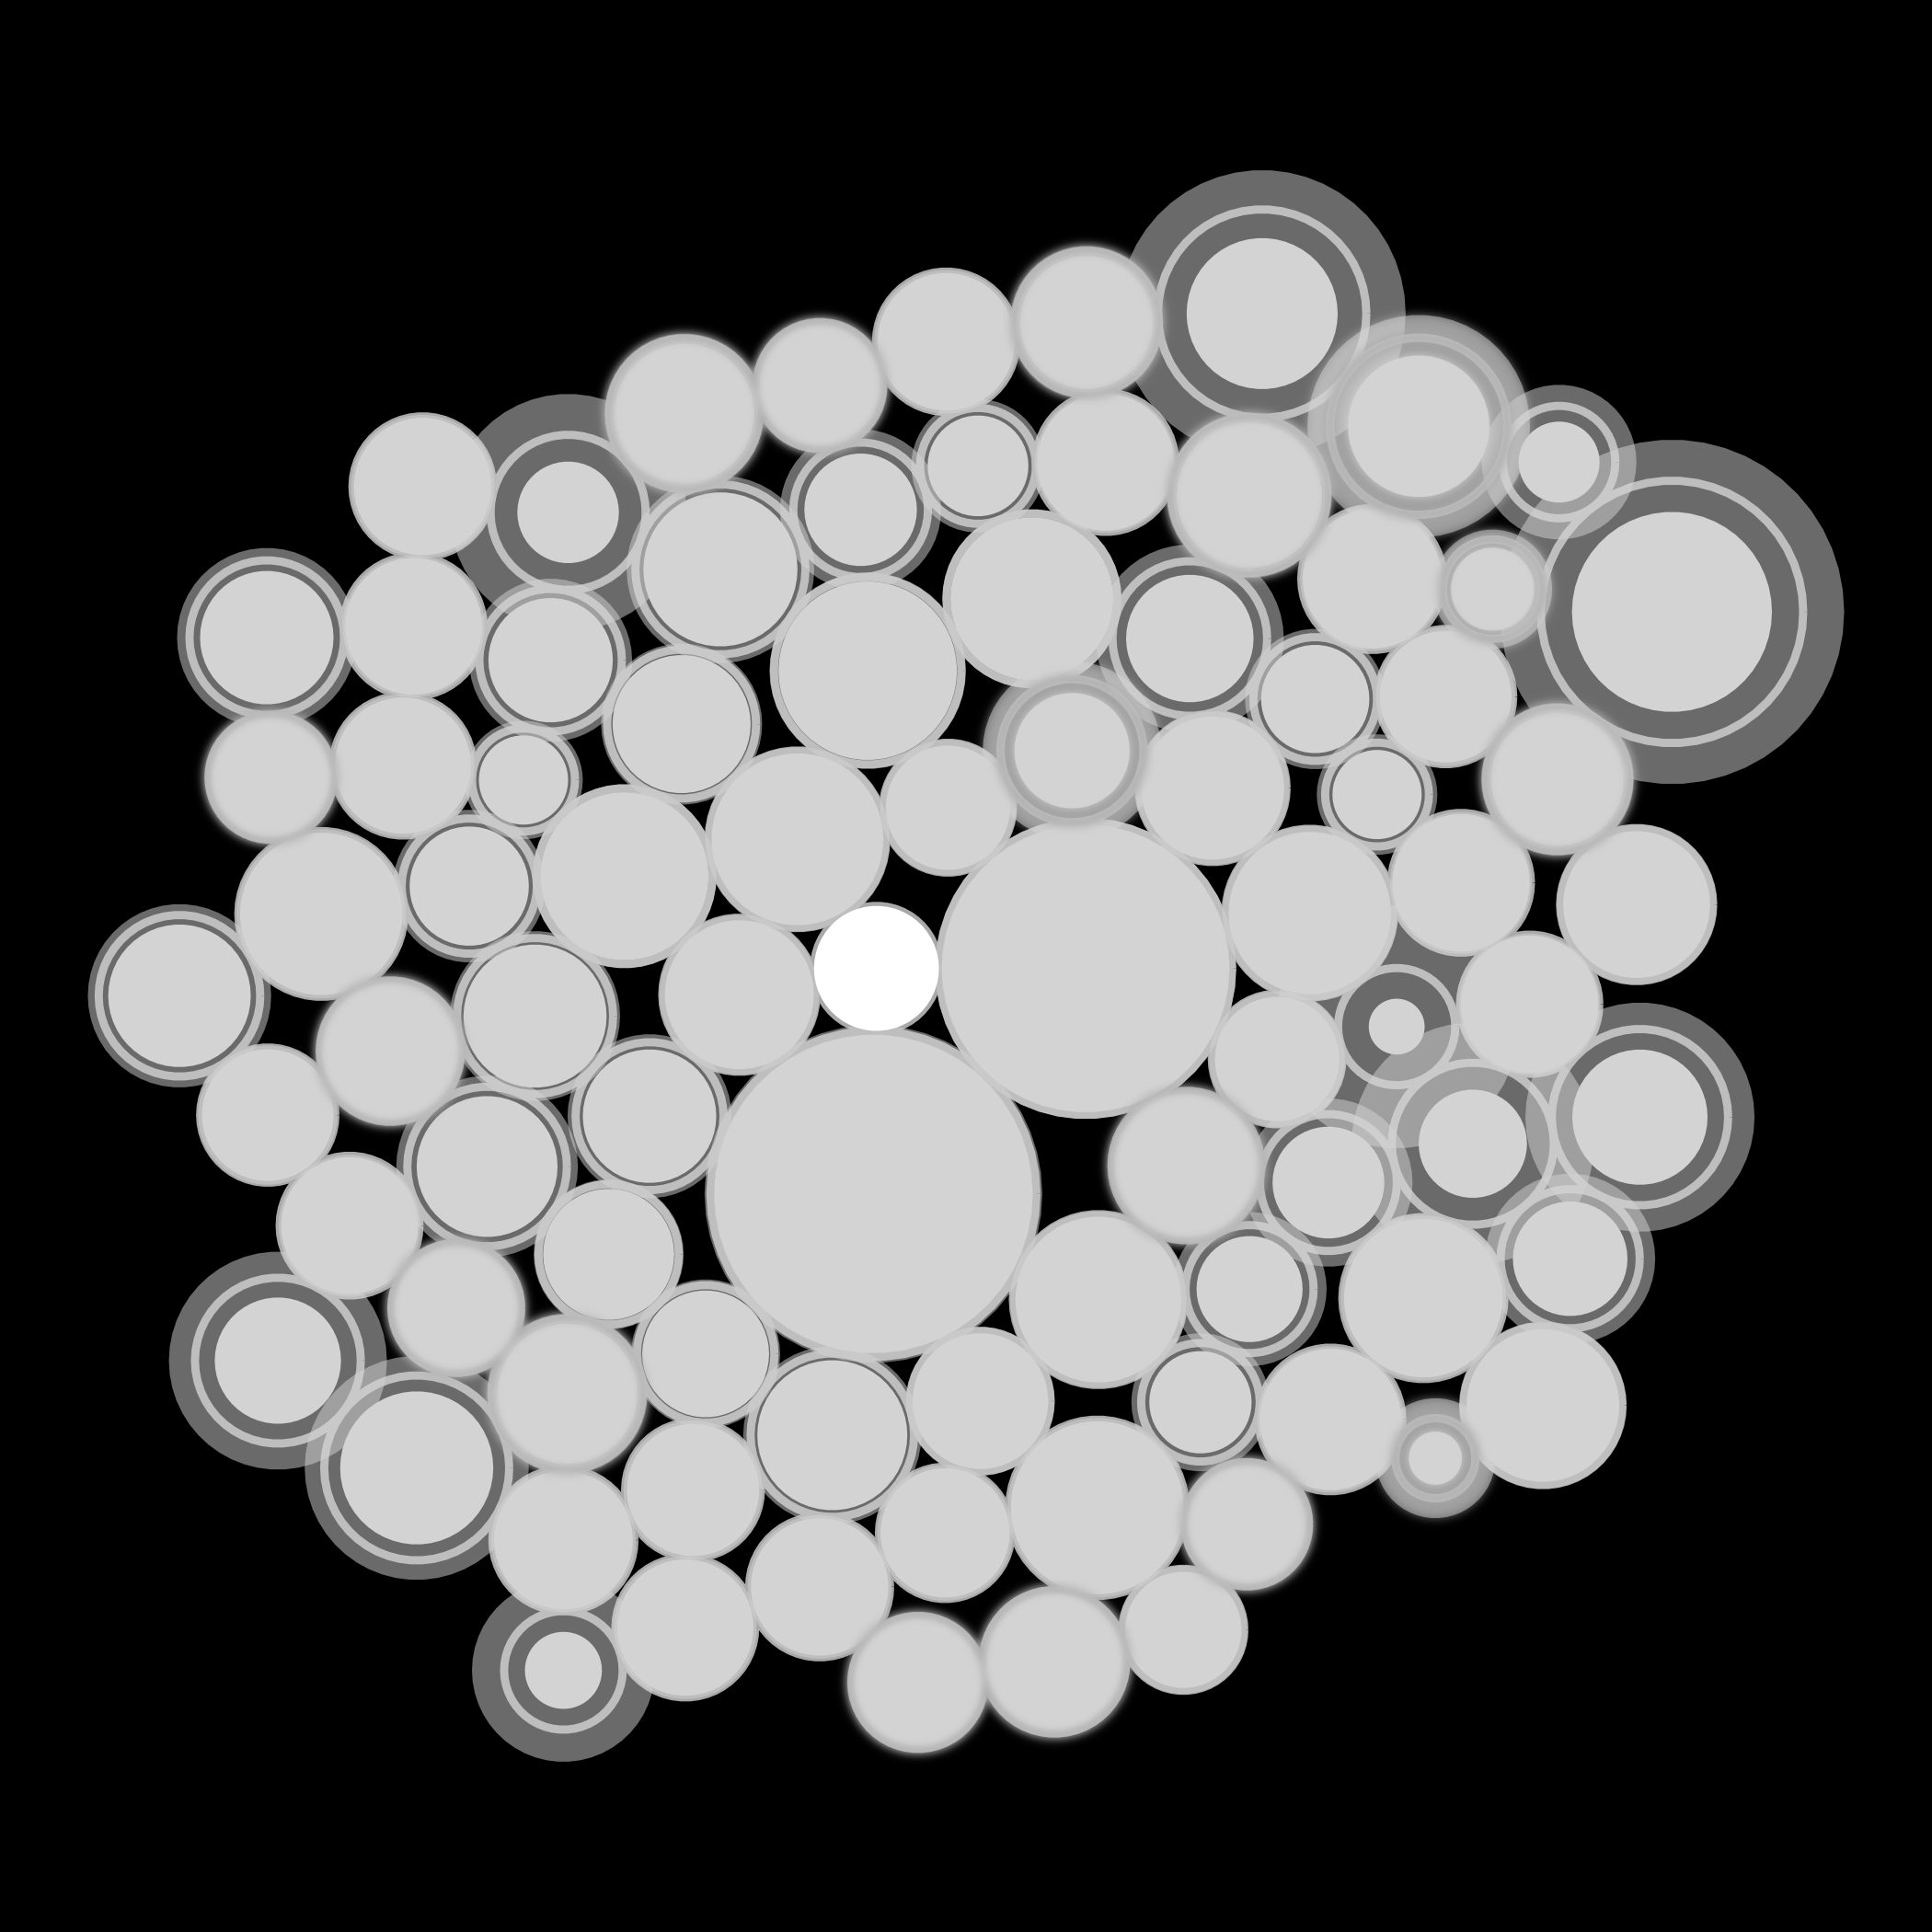 86 grey circles of varying size on a black background.